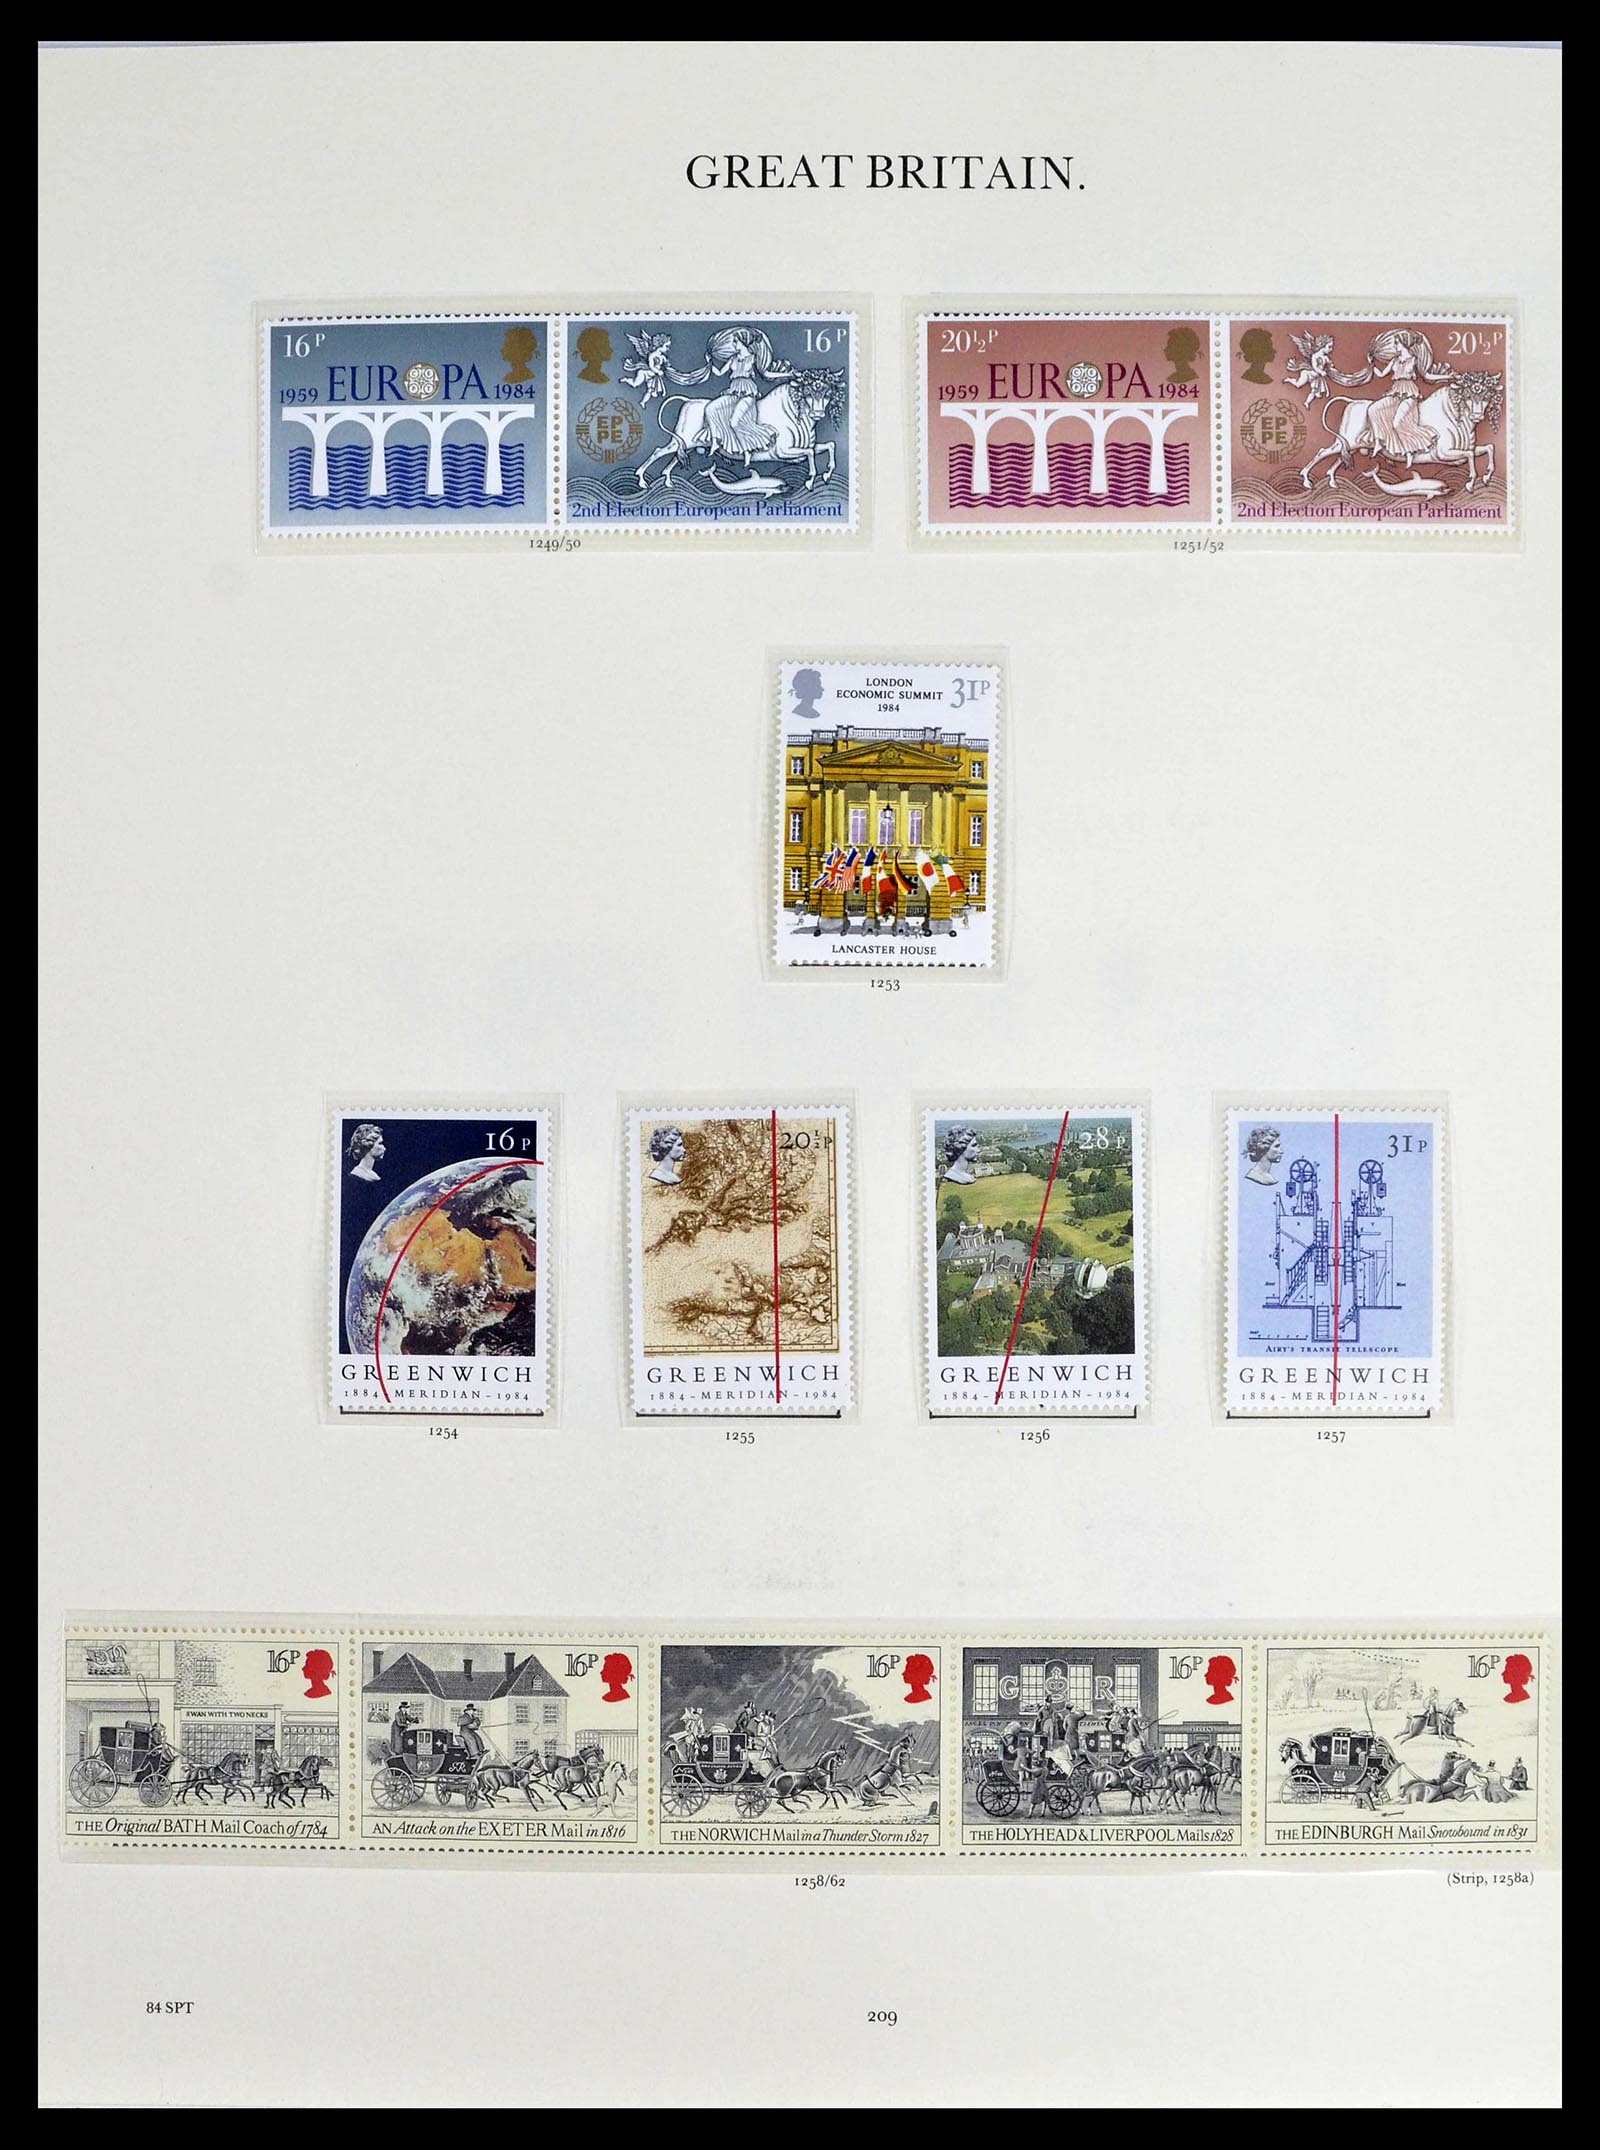 39025 0100 - Stamp collection 39025 Great Britain specialised 1840-1990.